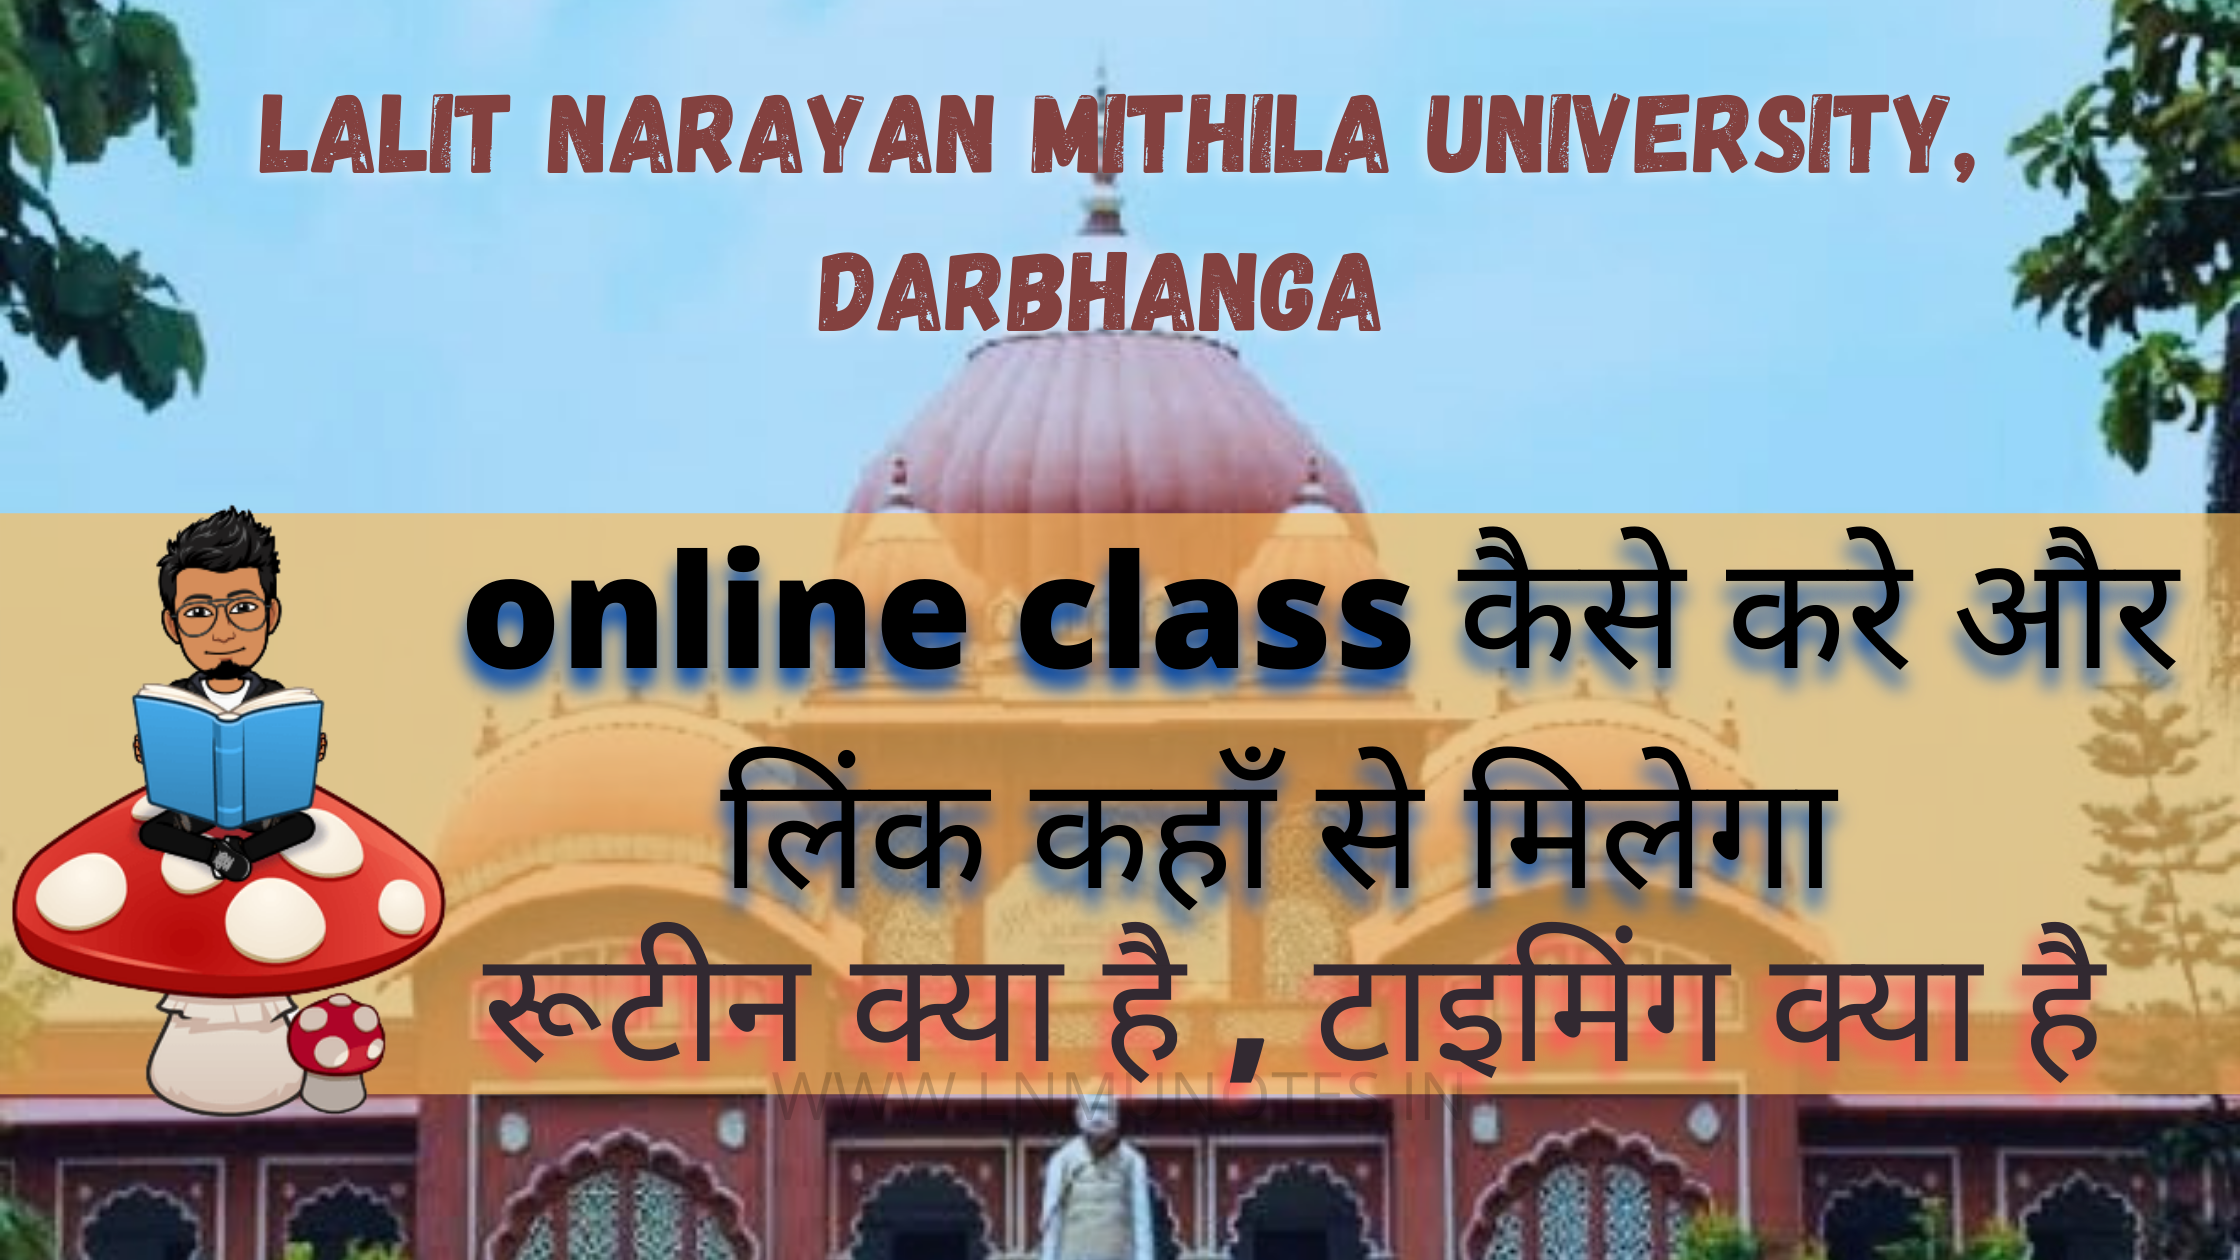 L.N MITHILA UNIVERSITY ONLINE CLASS JOINING LINK AND ROUTINE